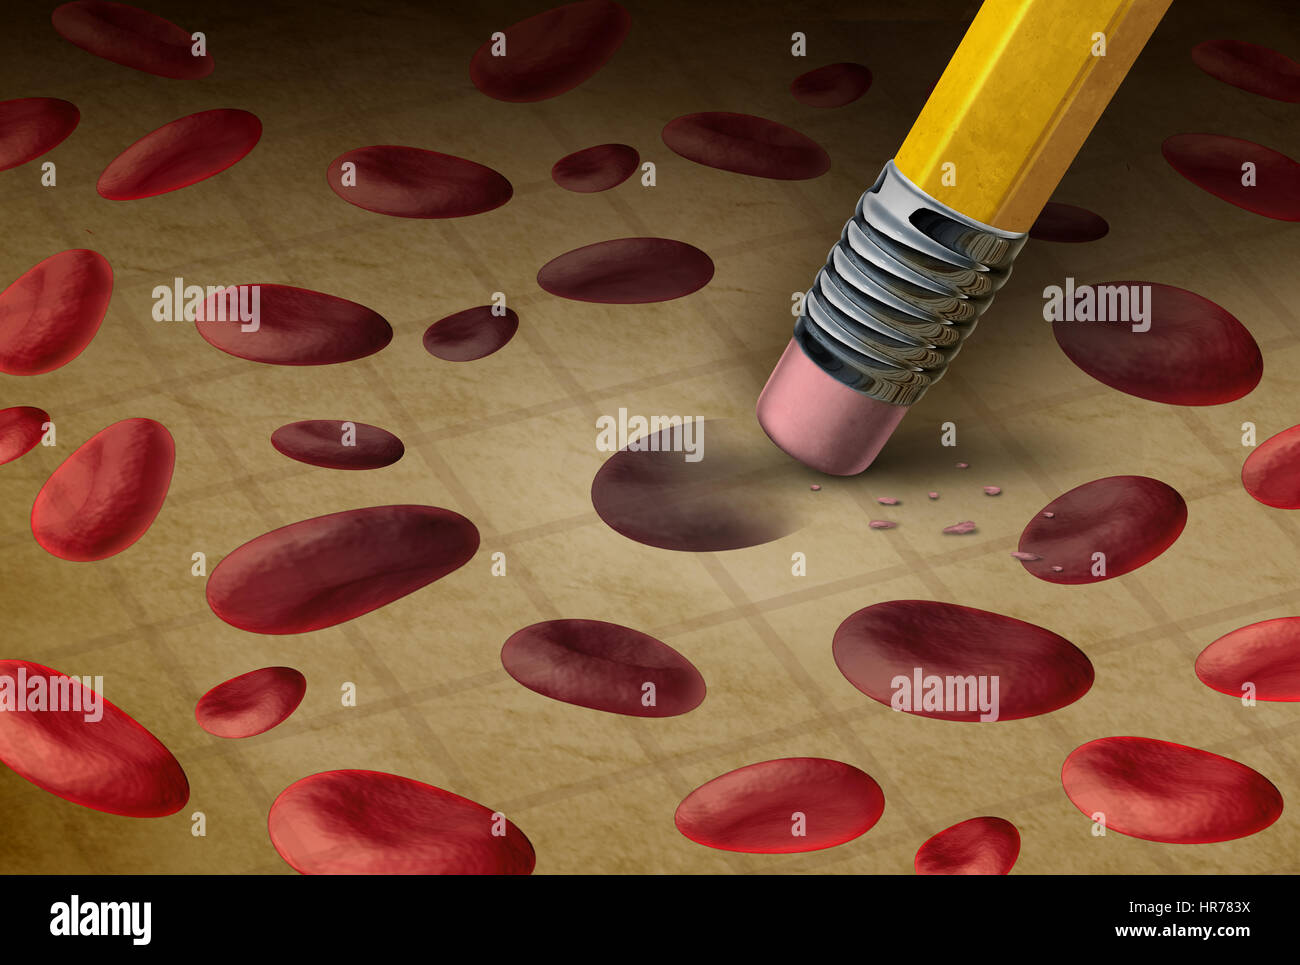 Blood disorder medical concept as a pencil erasing human cells as a medicine hematology symbol for anemia or hemophilia as a 3D illustration. Stock Photo